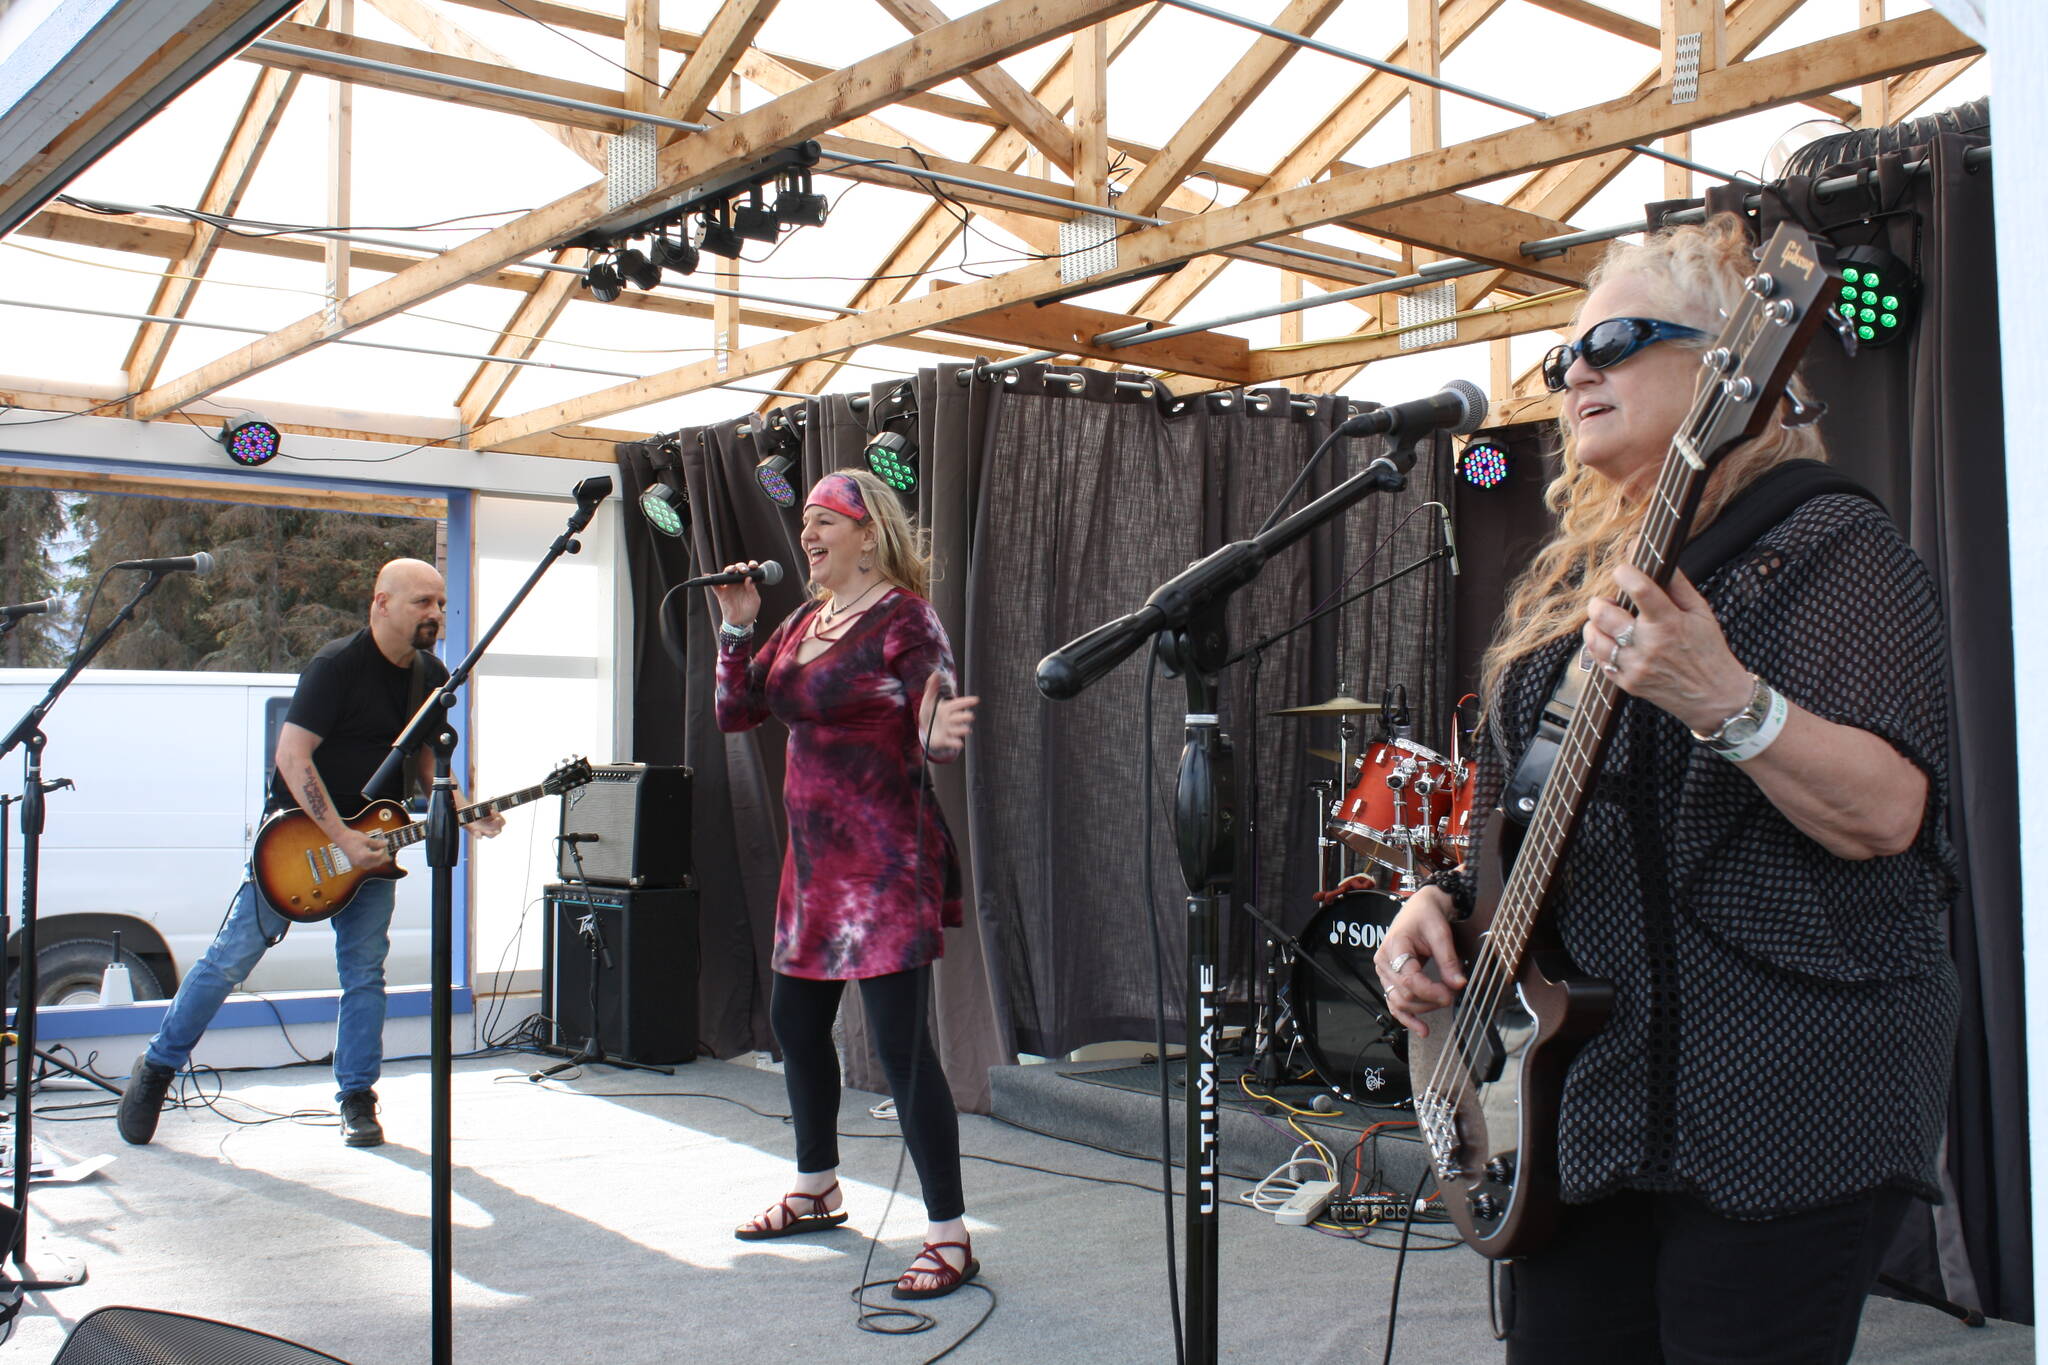 Danger Money plays at the Rock’N the Ranch at the RustyRavin Music Festival in Kenai, Alaska, on Friday, July 8, 2022. (Camille Botello/Peninsula Clarion)